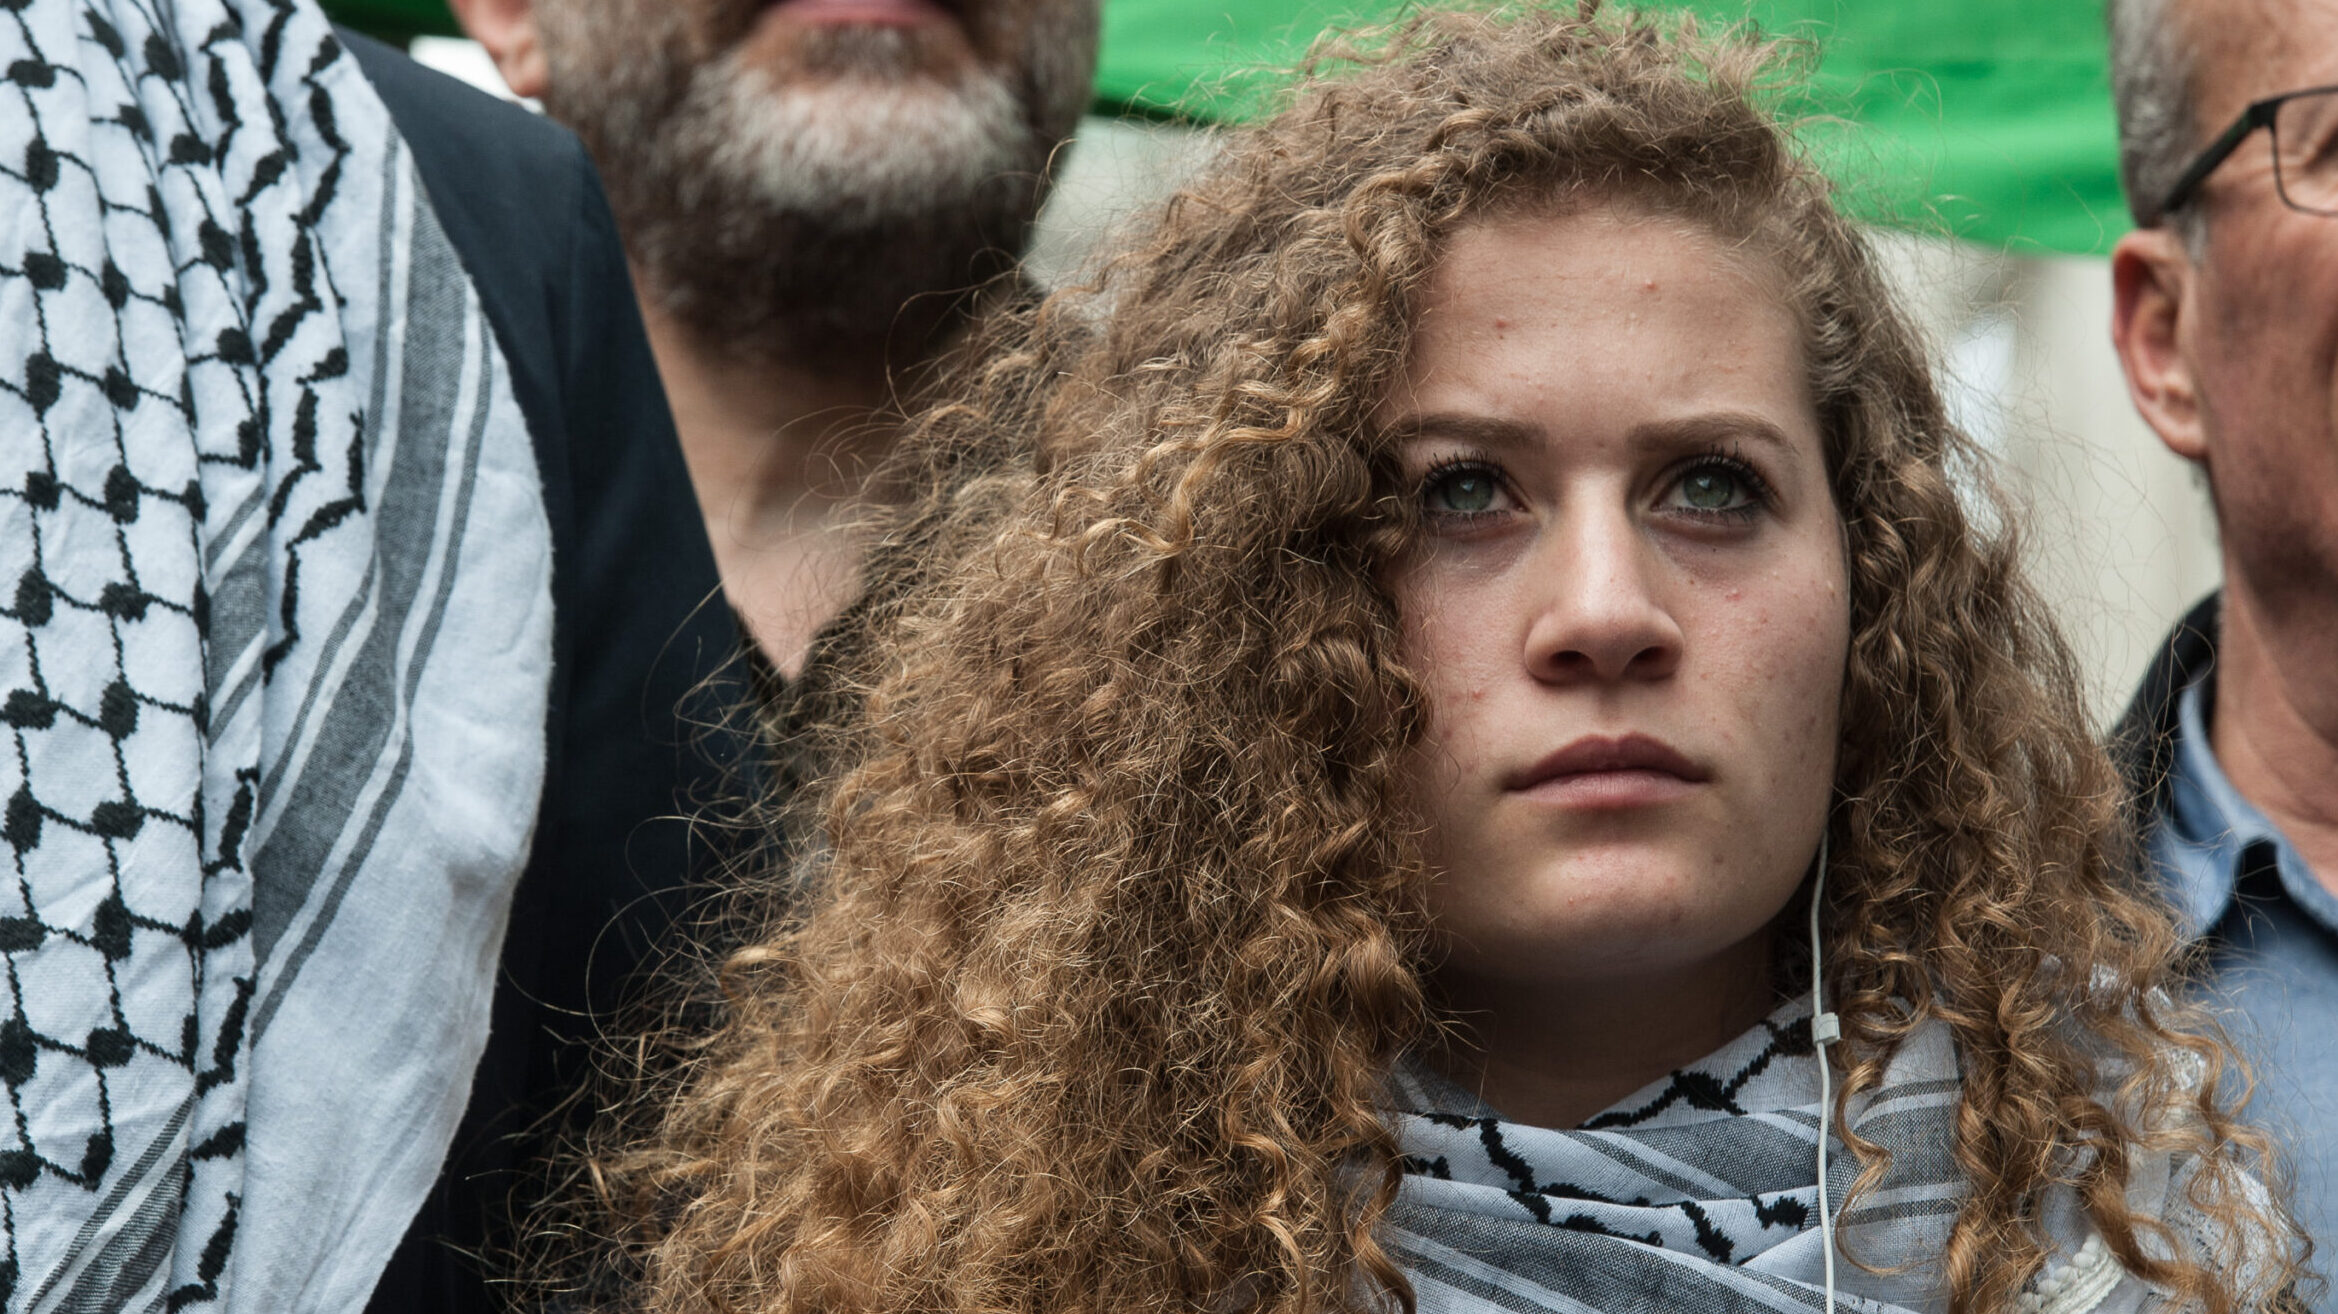 Ahed Tamimi Taken Into Custody Once More Over Alleged Terrorism Incitement